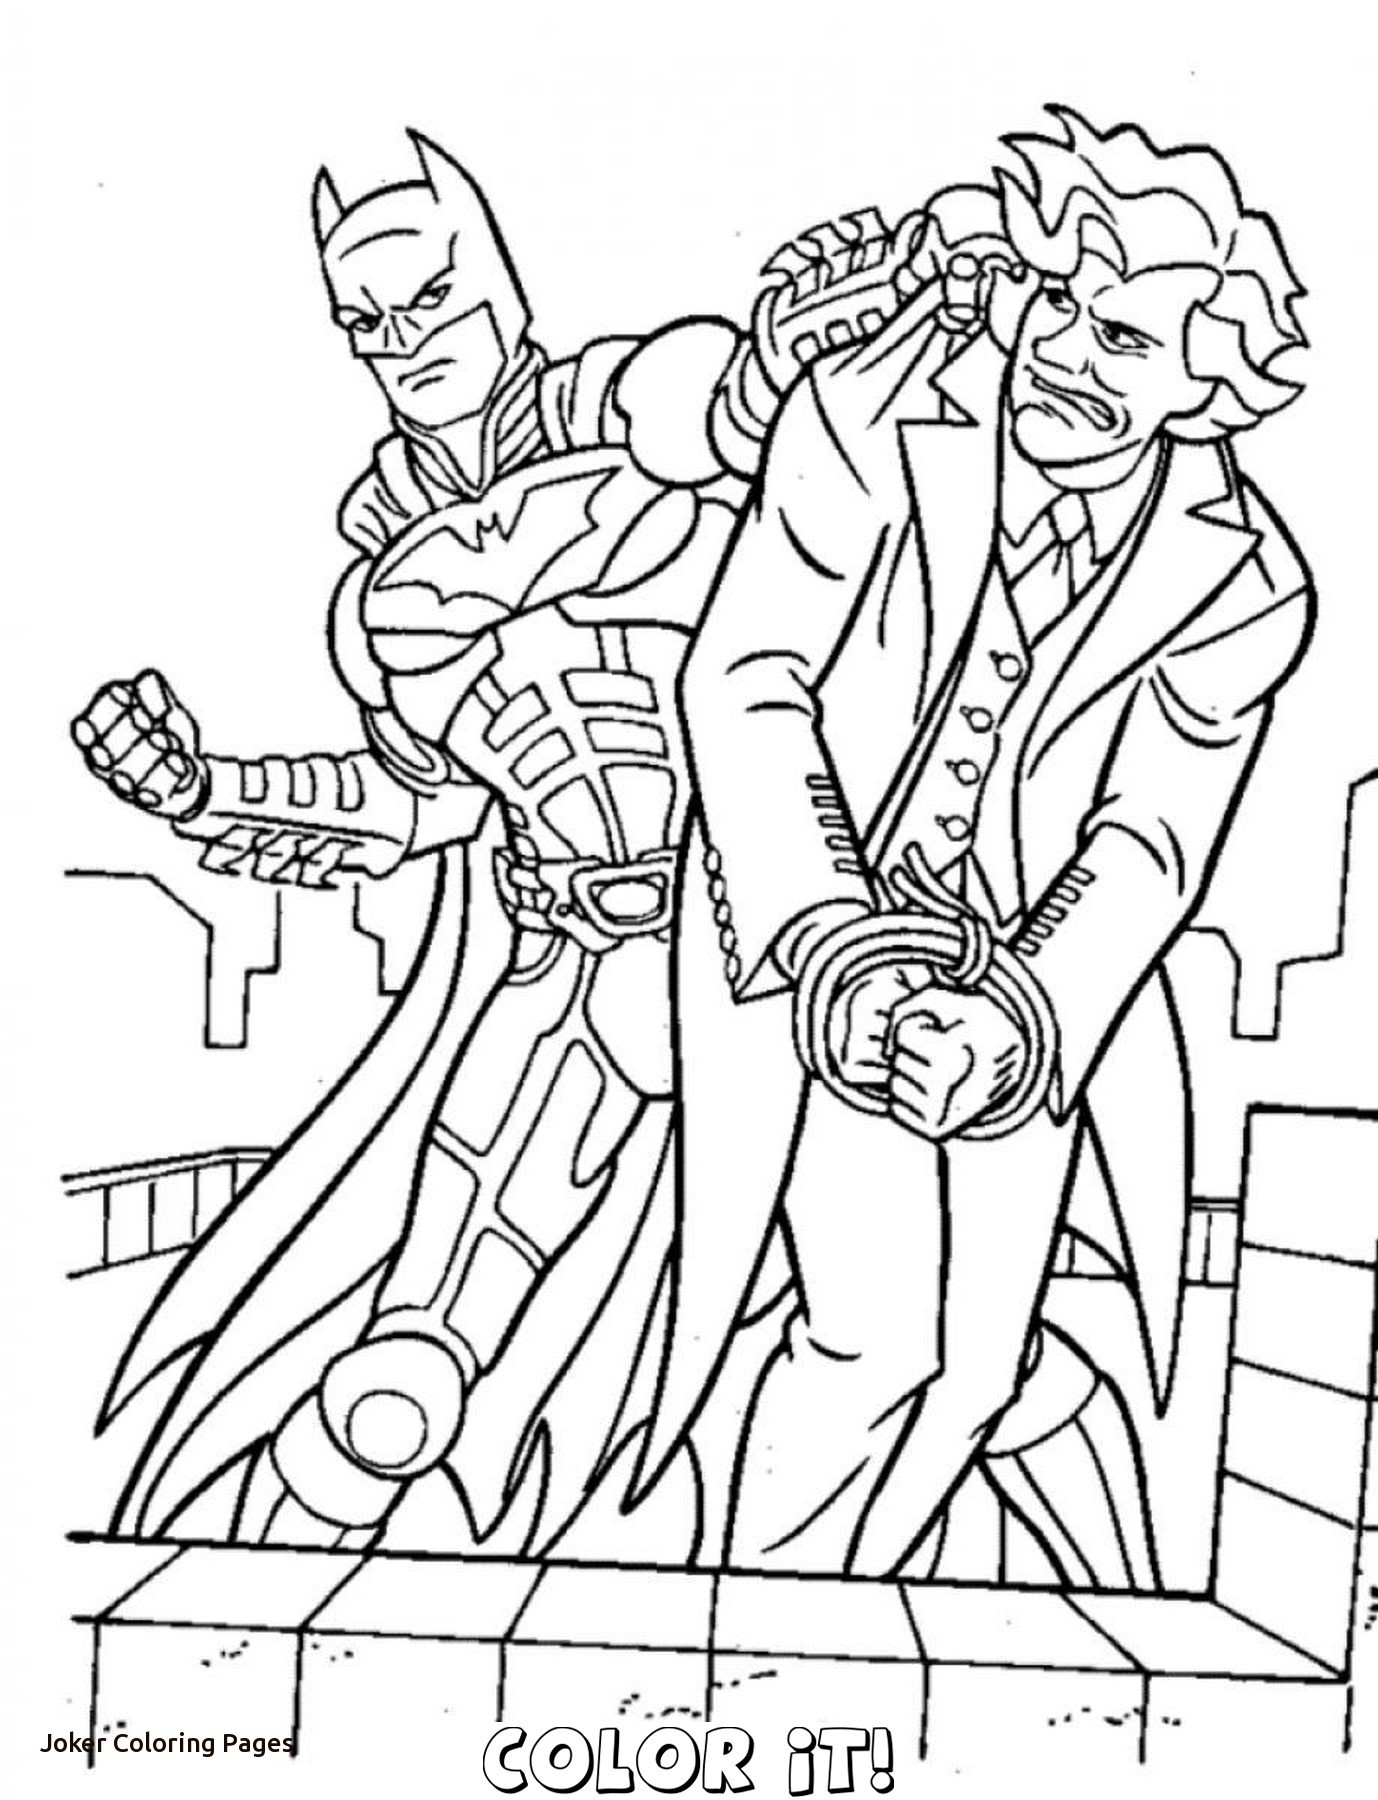 523 Simple Joker Lego Coloring Pages with Animal character